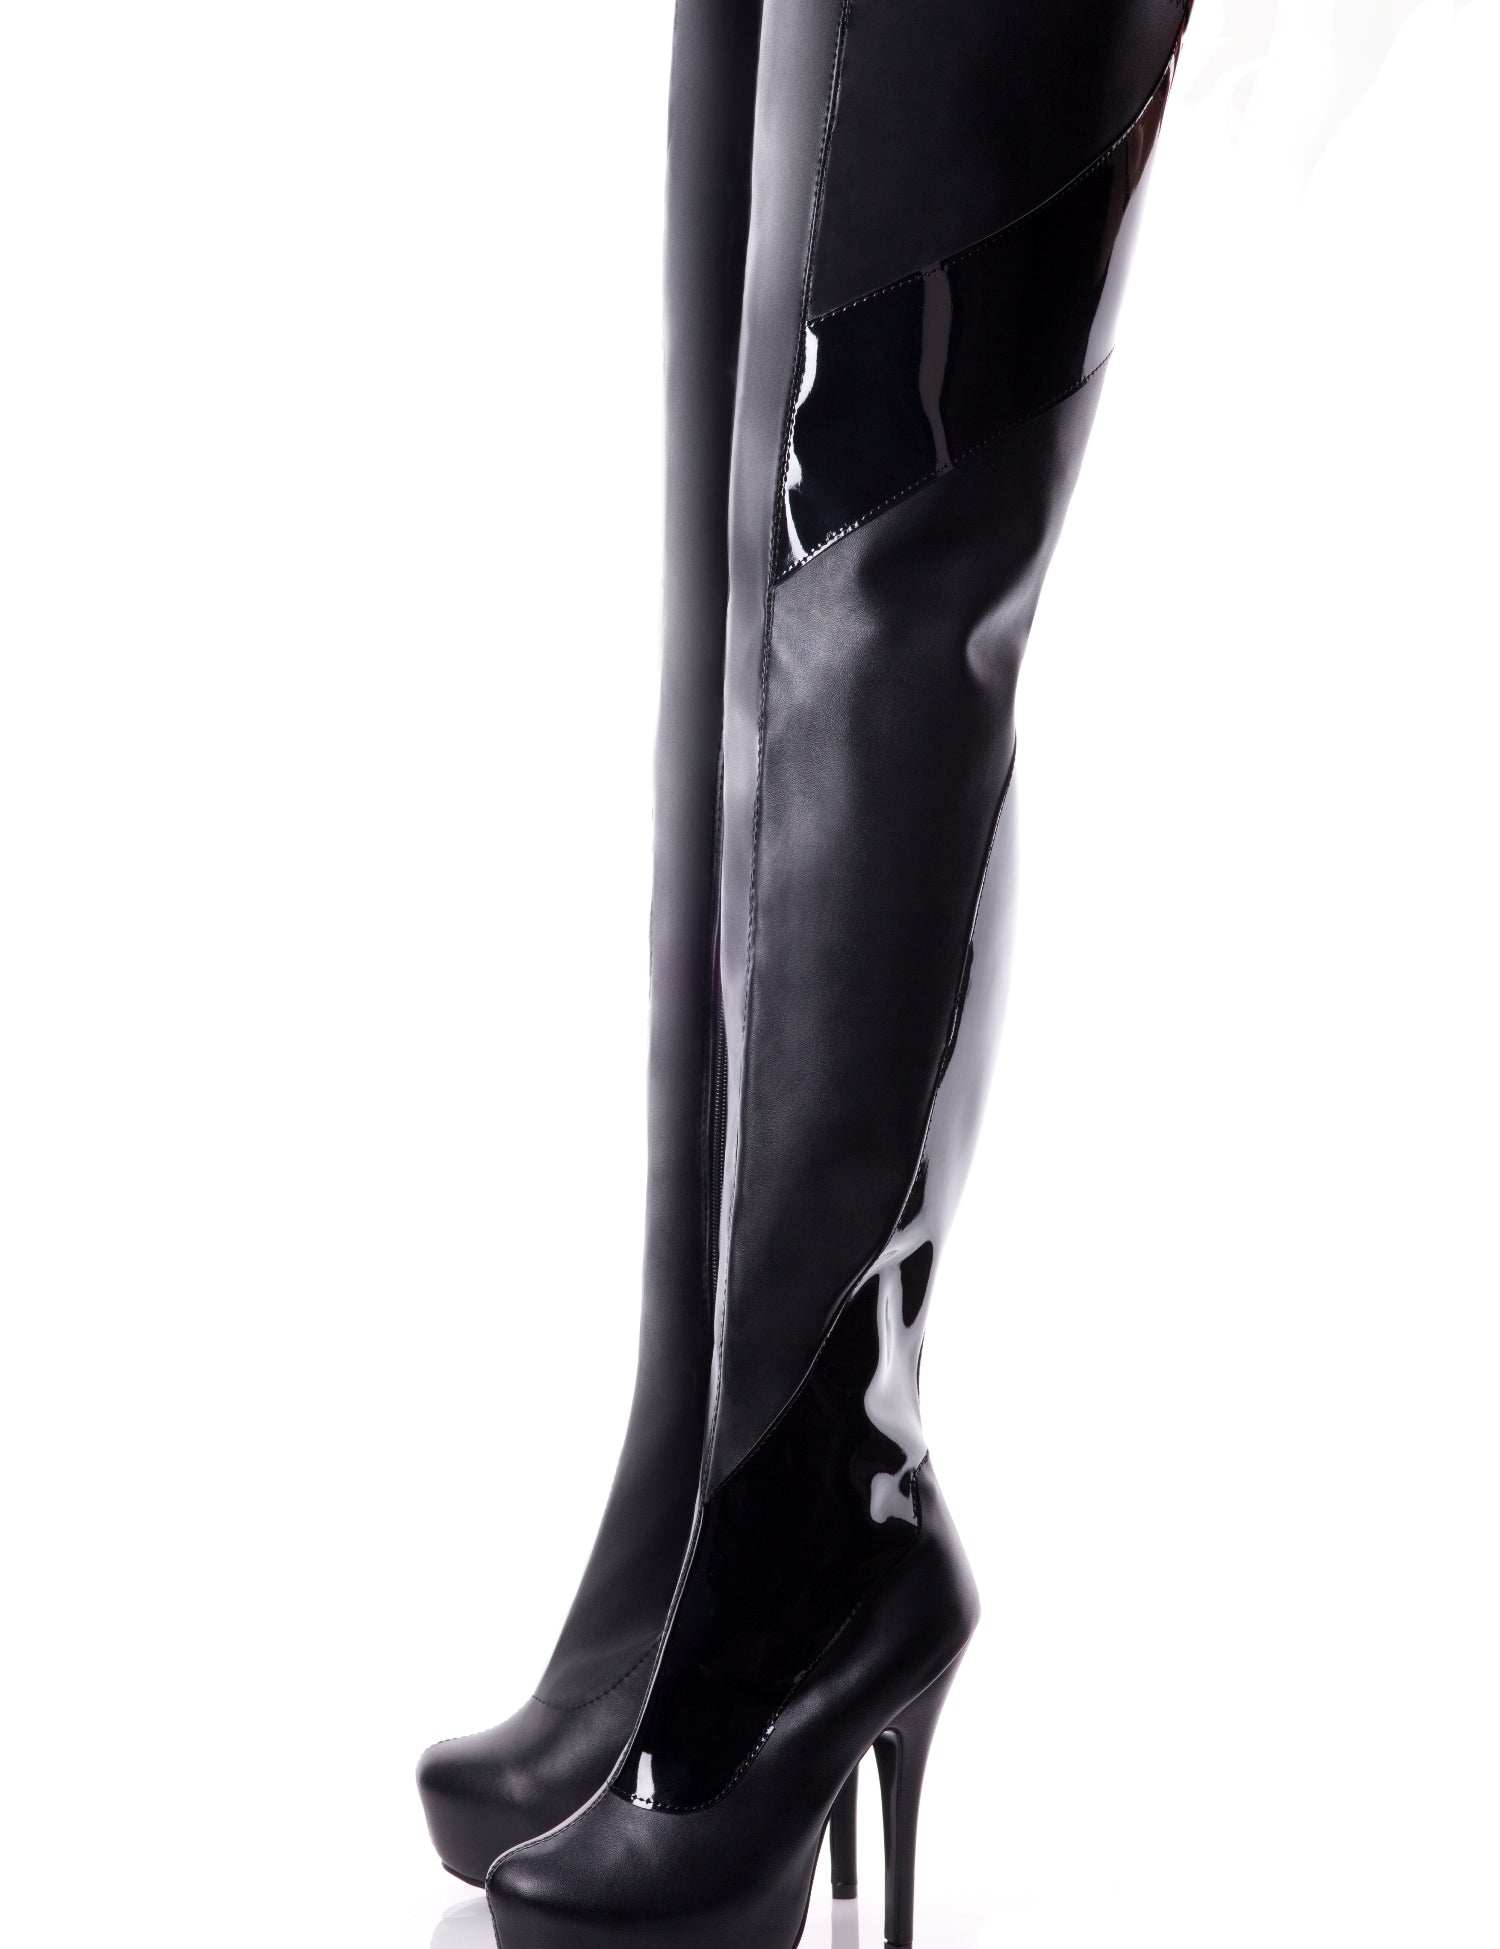 Playgirl Thigh High Black Matt Boots With Patent Detail